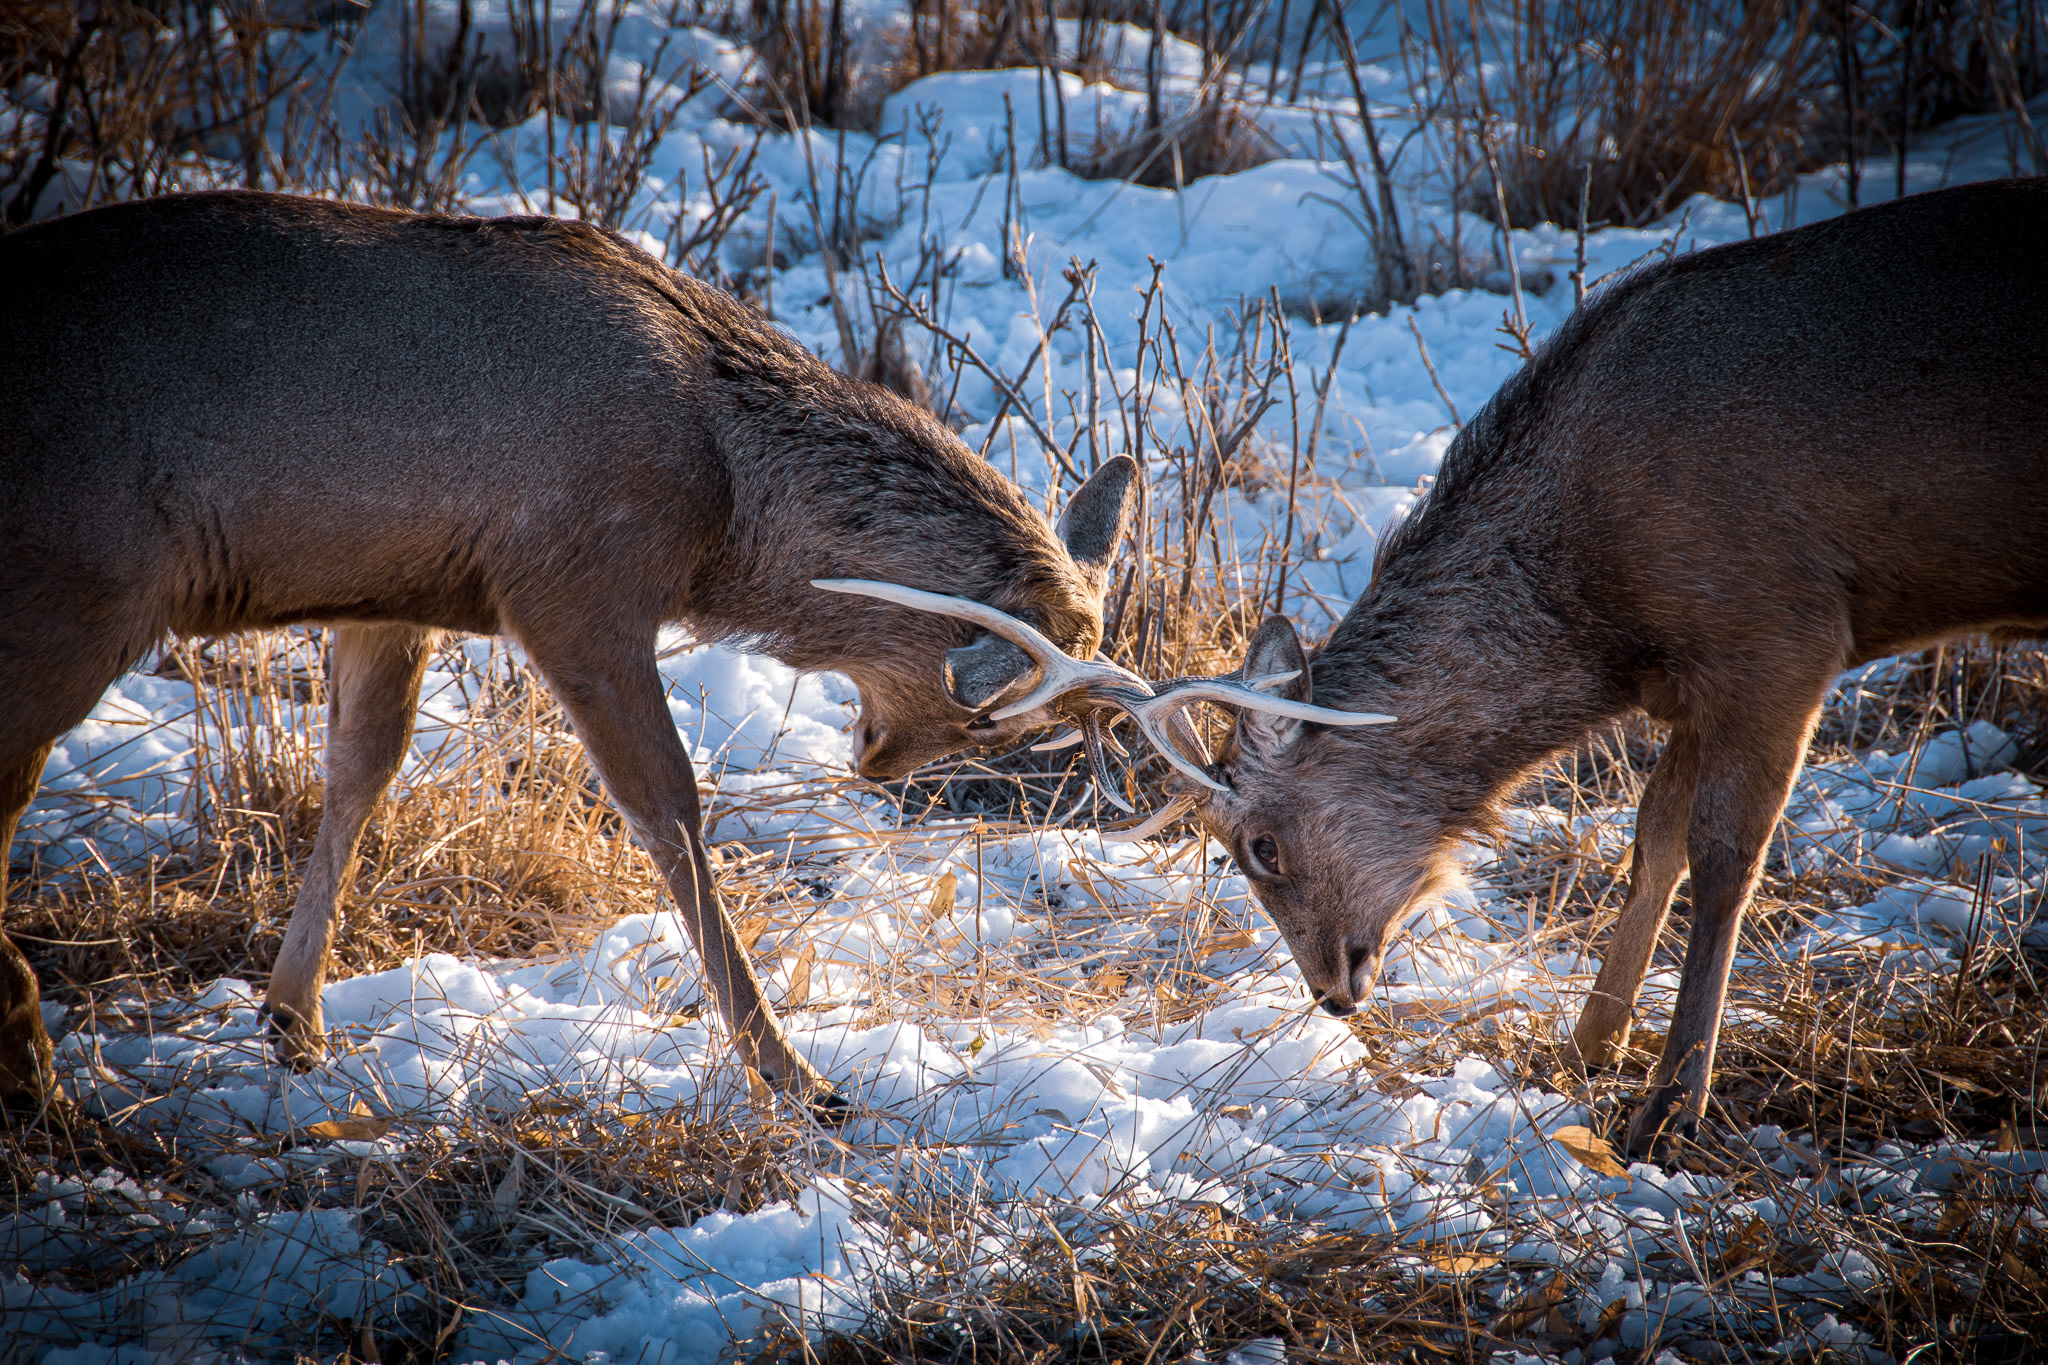 Two stags lock antlers on the Notsuke Penninsula. The ground is partially covered in snow.